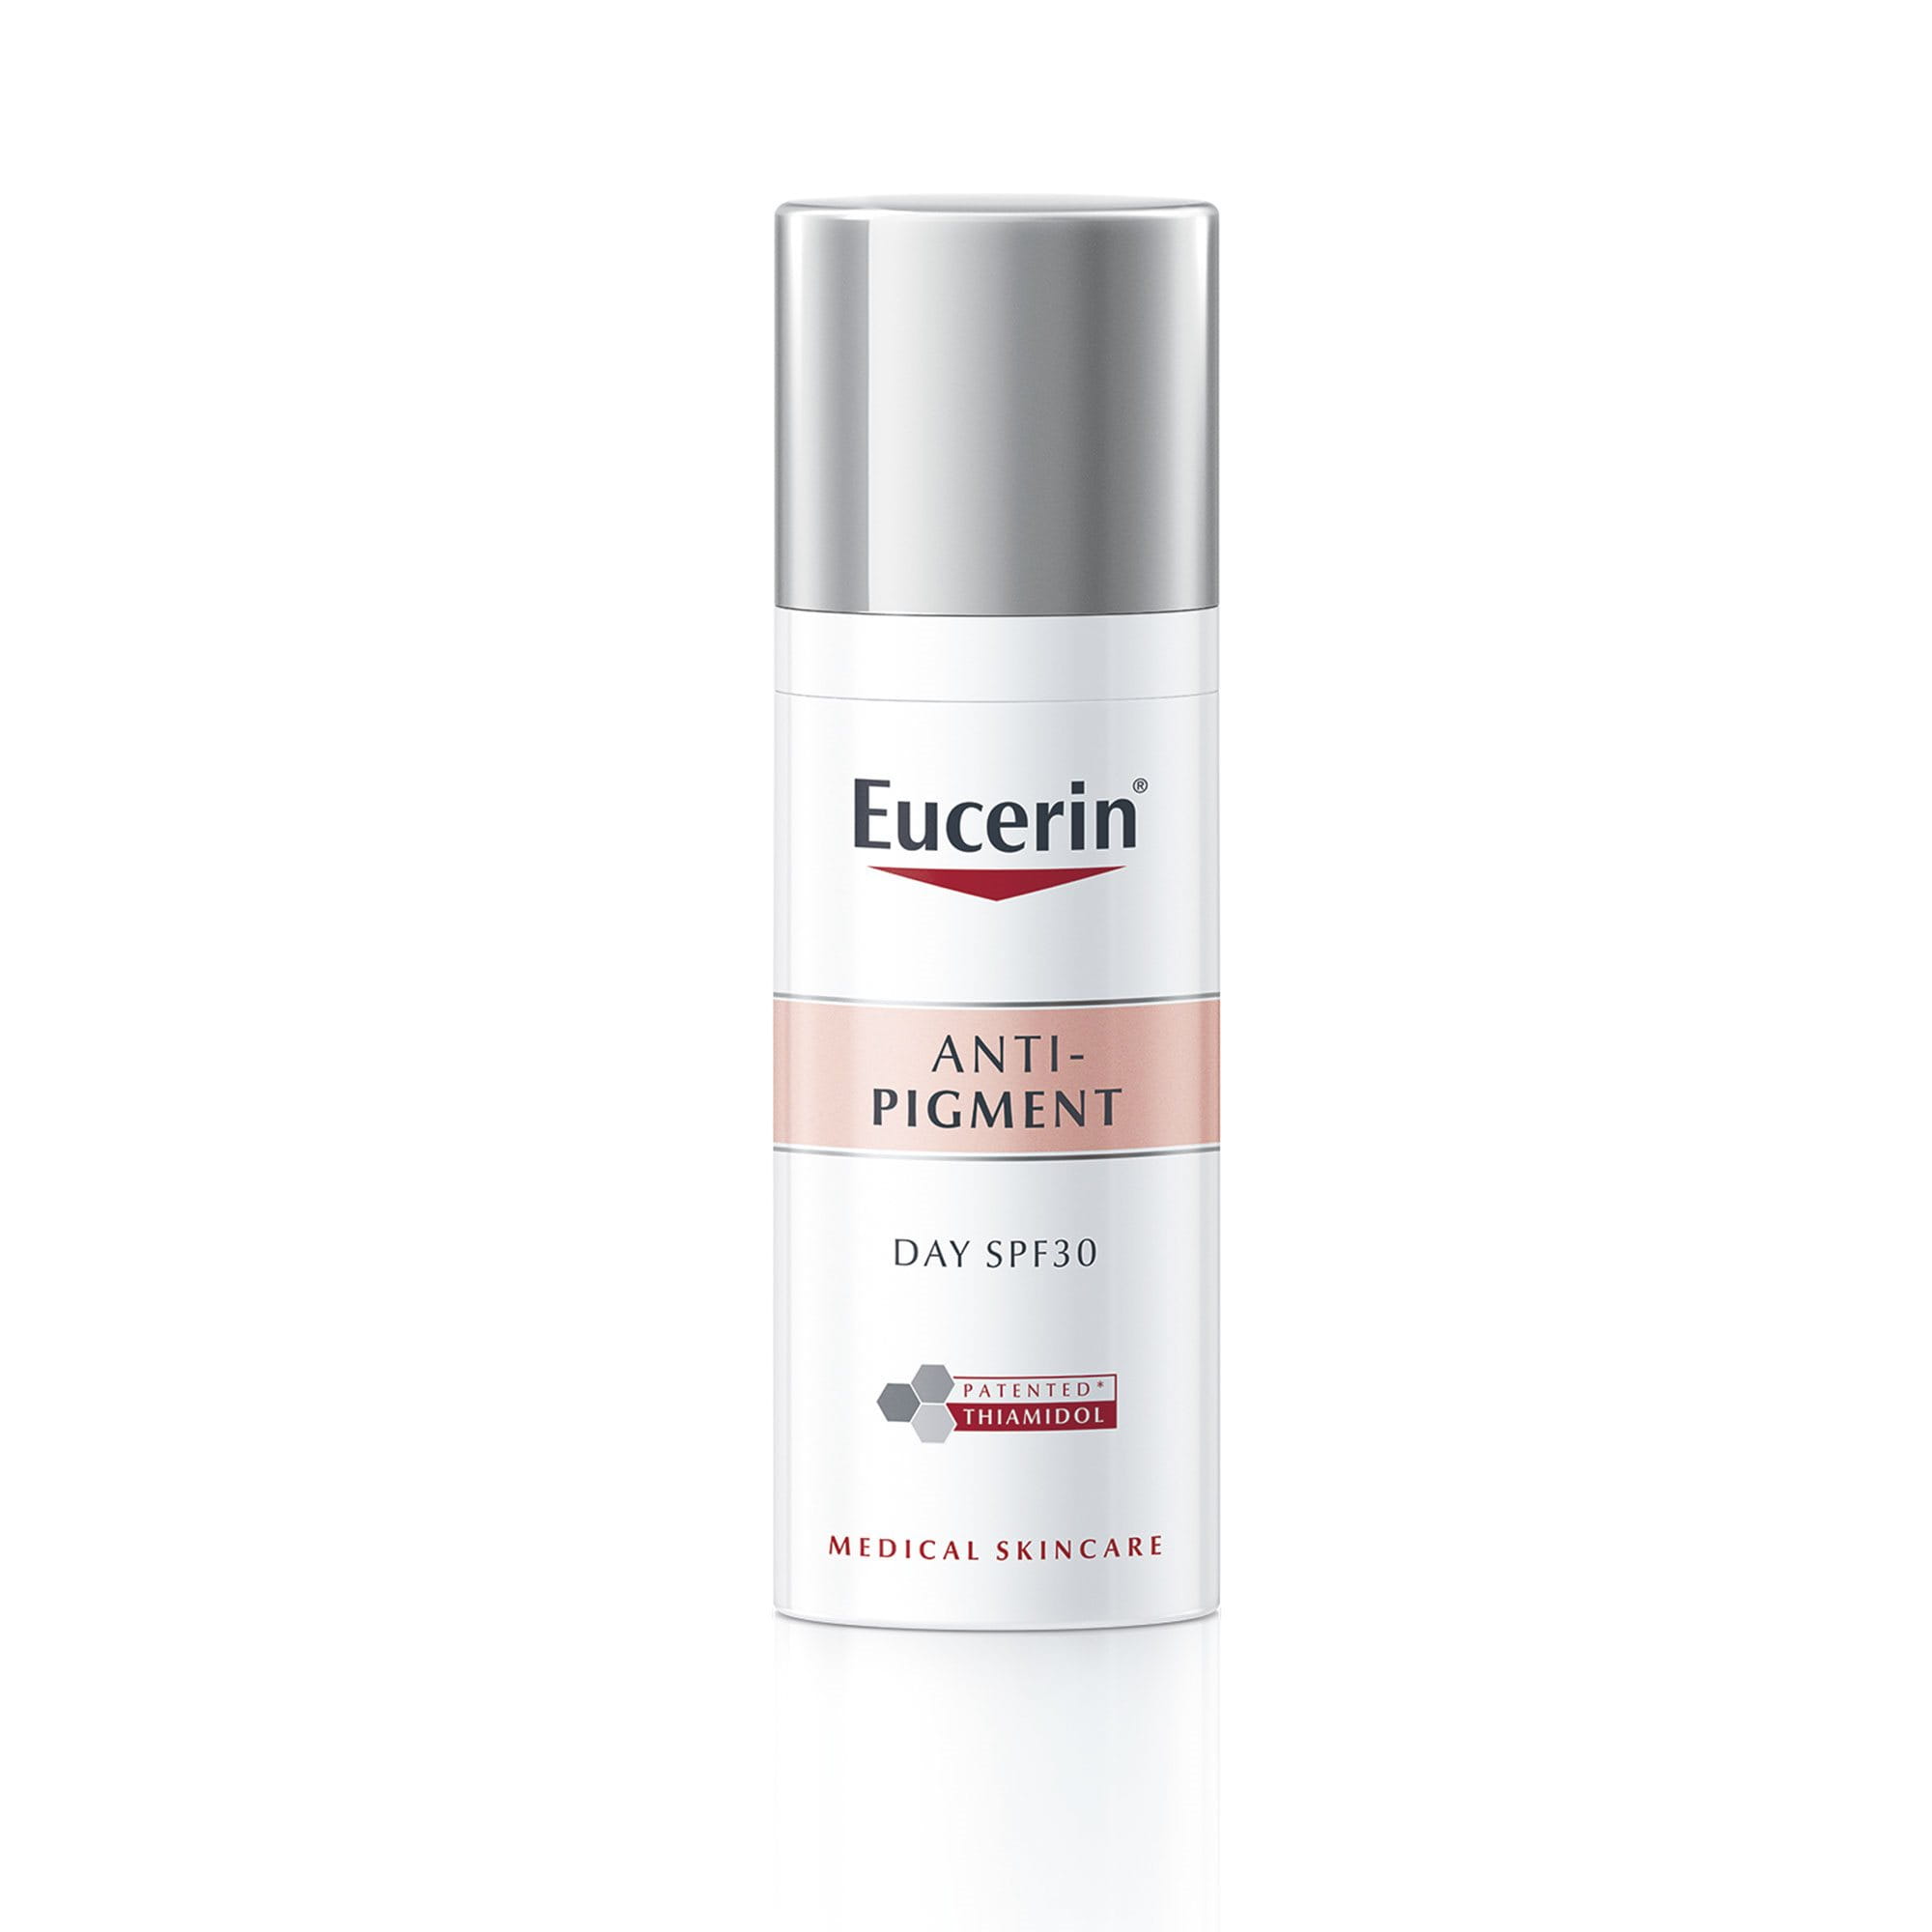 Eucerin Anti-Pigment Day SPF is a pigmentation cream face that reduces dark spots and prevents their re-appearance for even, radiant skin.